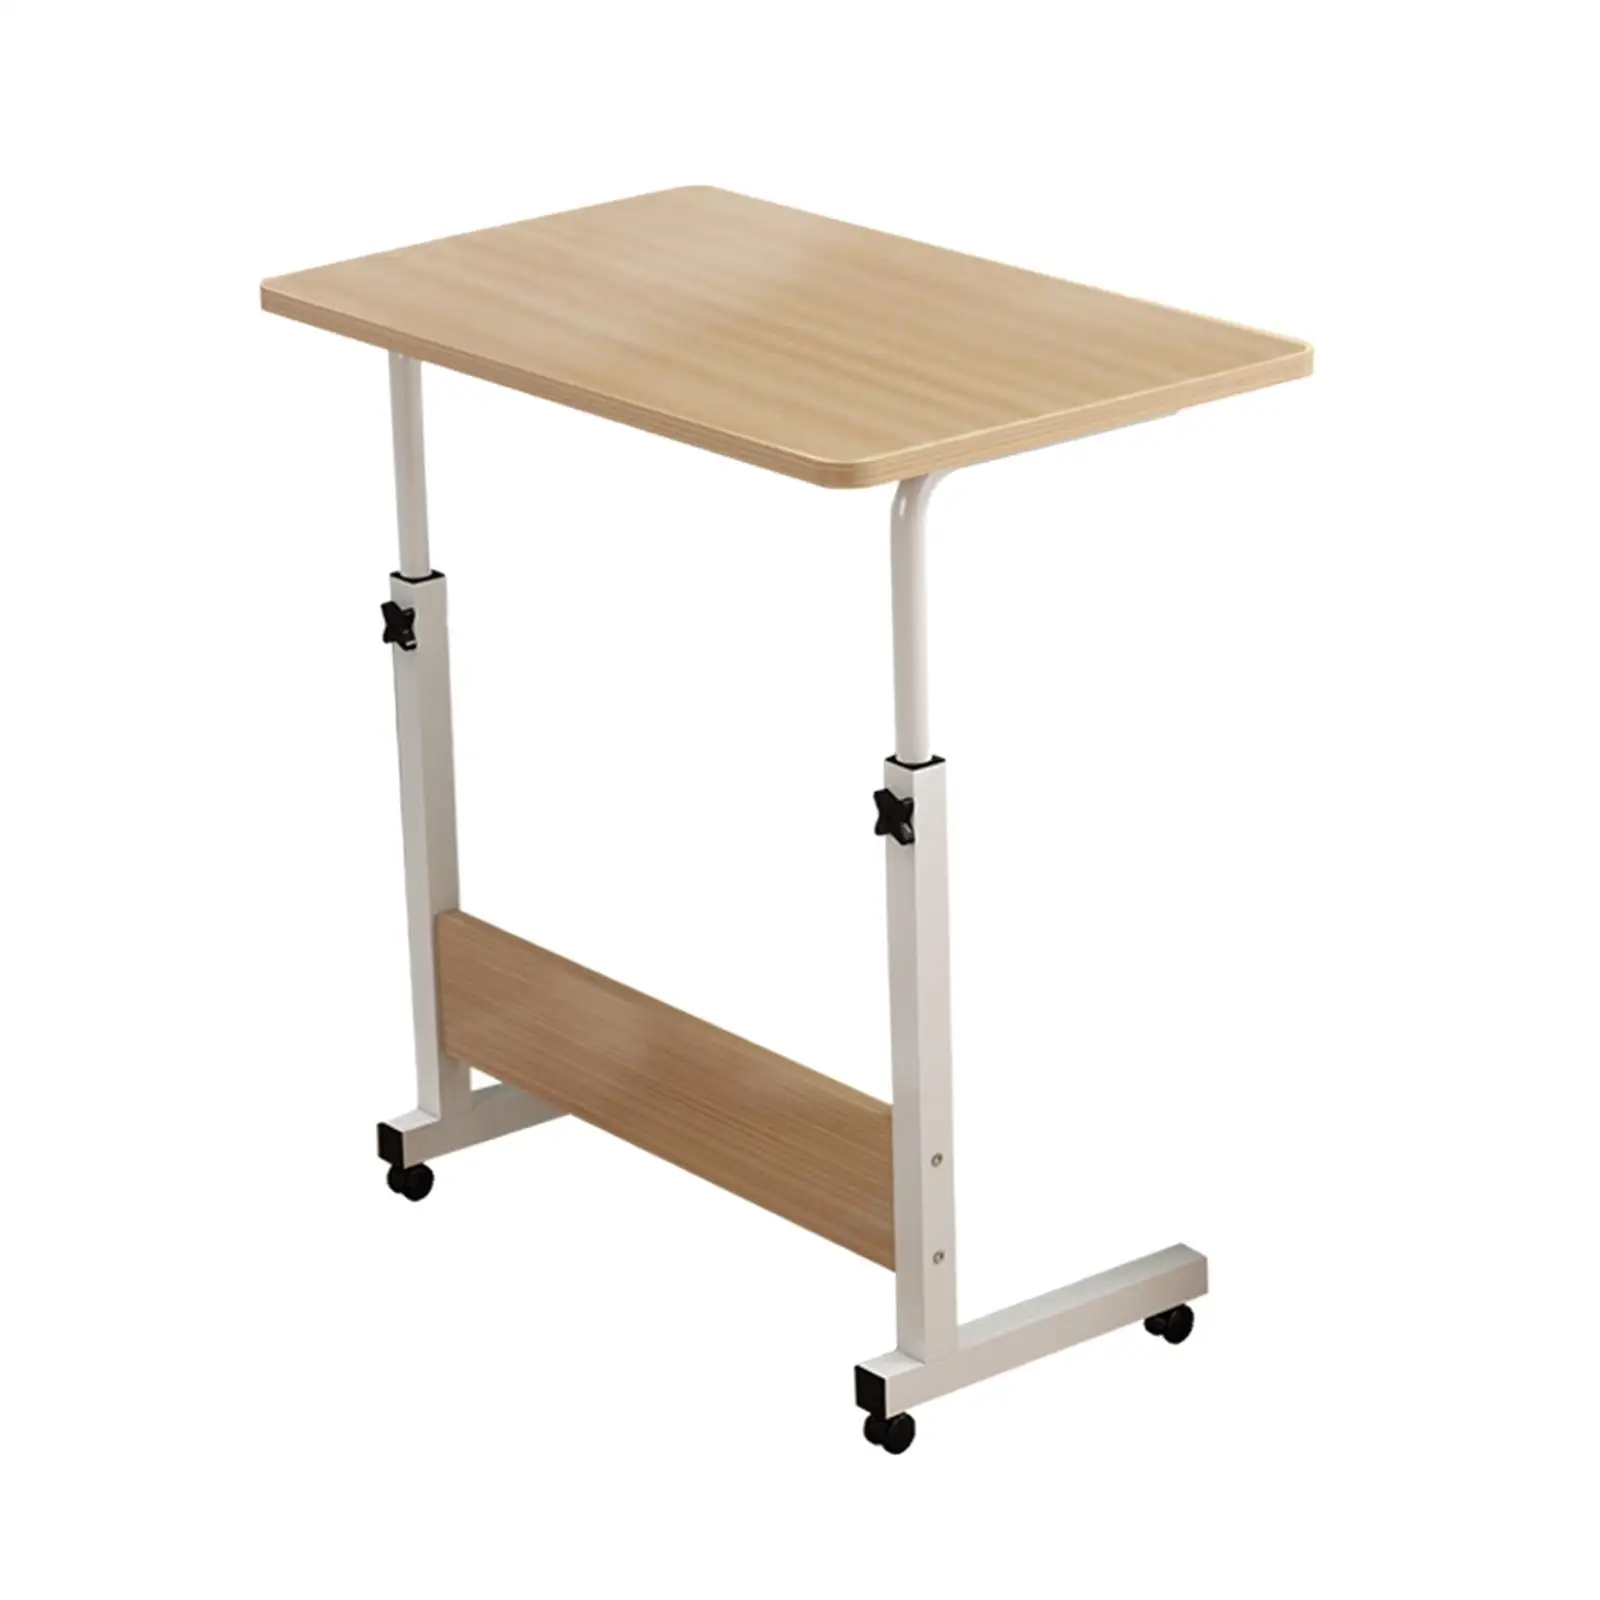 Height Adjustable Standing Desk Laptop Desk with Wheels Table Small Computer Desk for Living Room Study Home Office